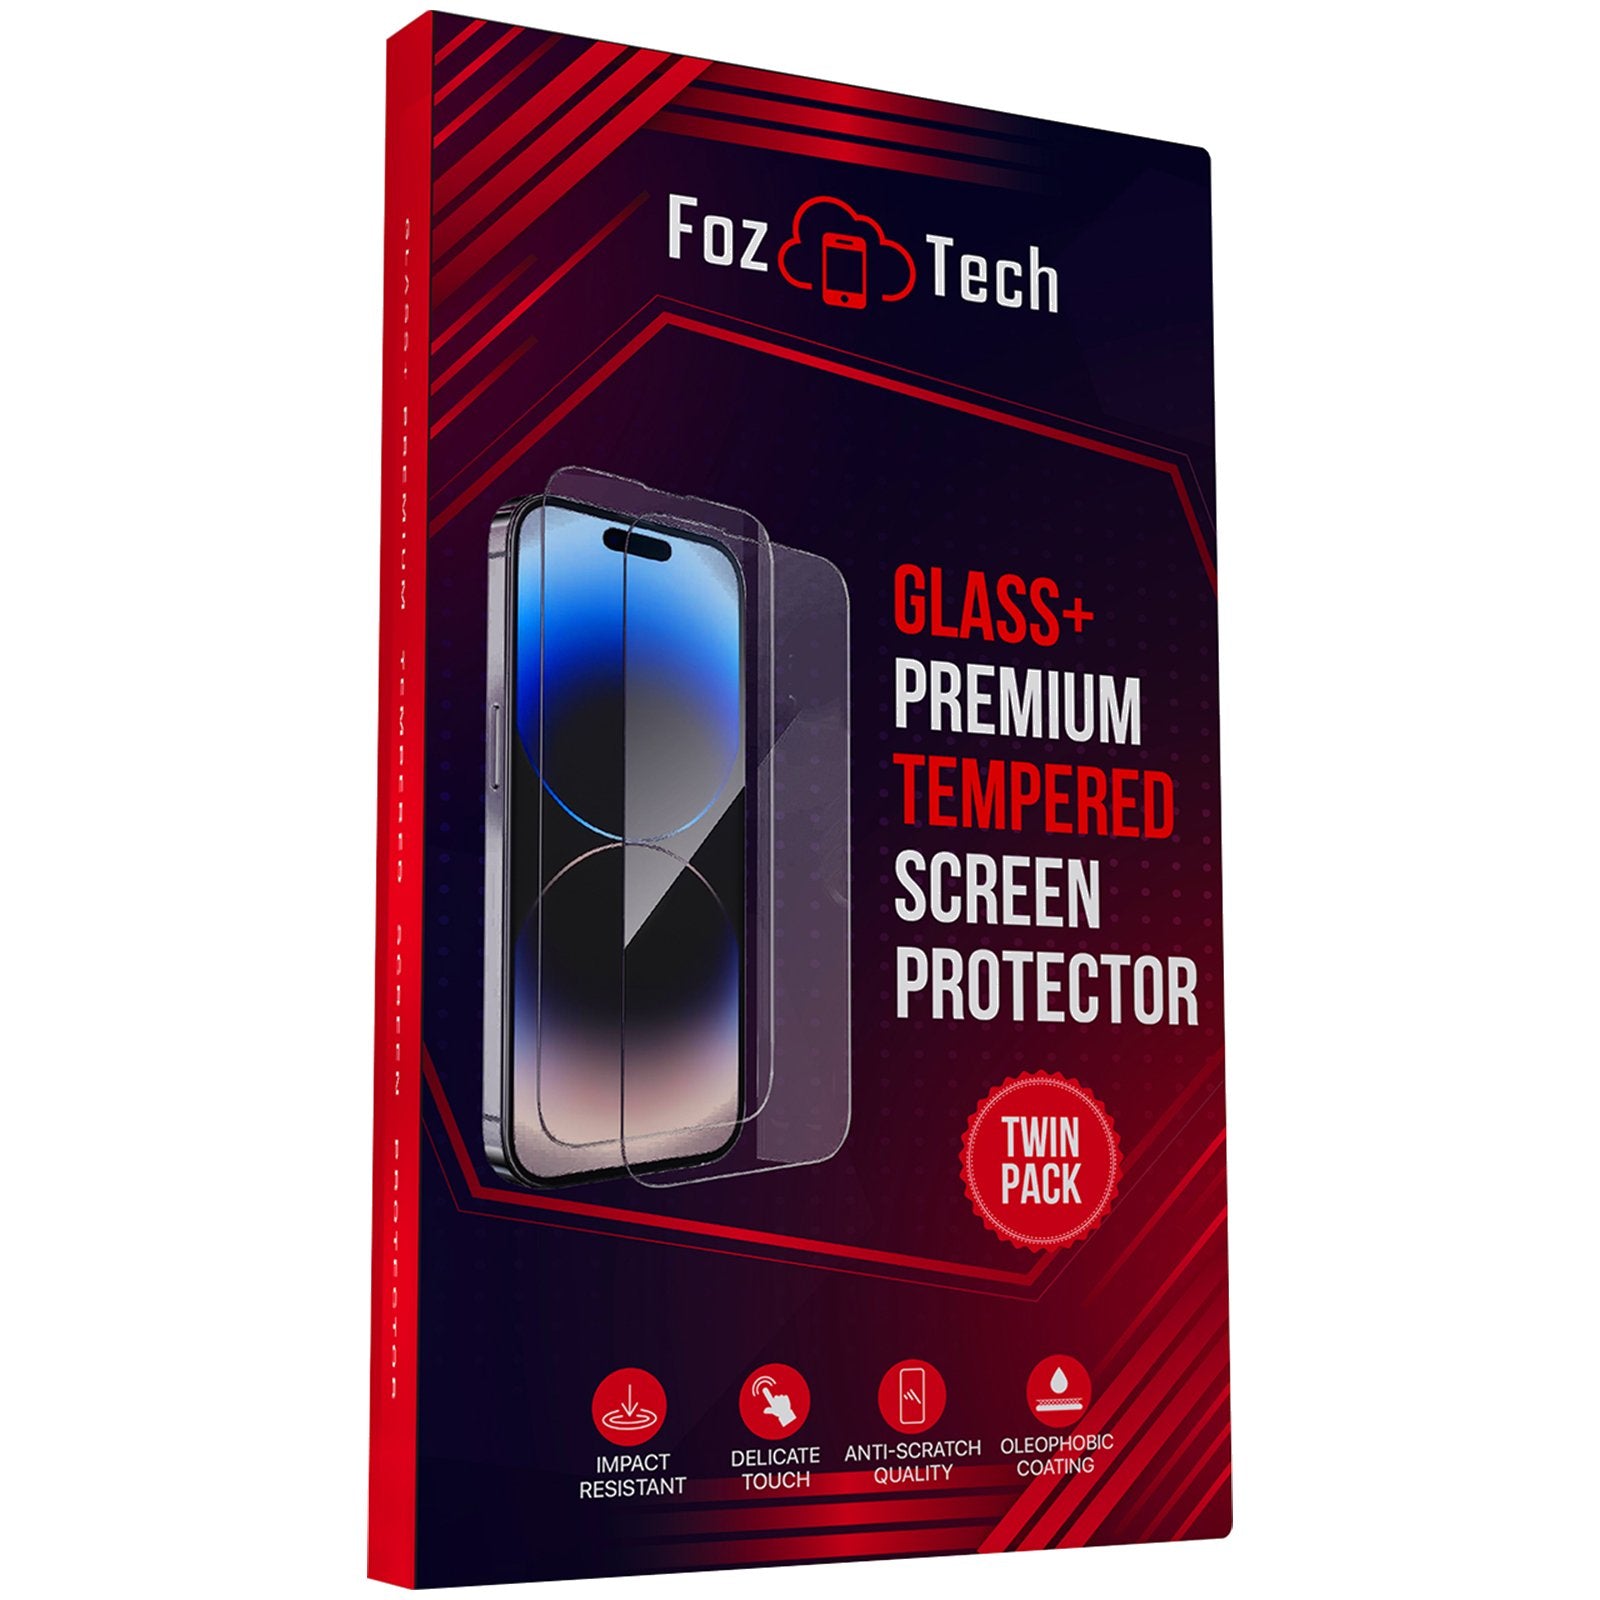 FozTech - Tempered Glass Screen Protector For iPhone - Twin Pack - iPhone Screen Protector - FozTech Official Store